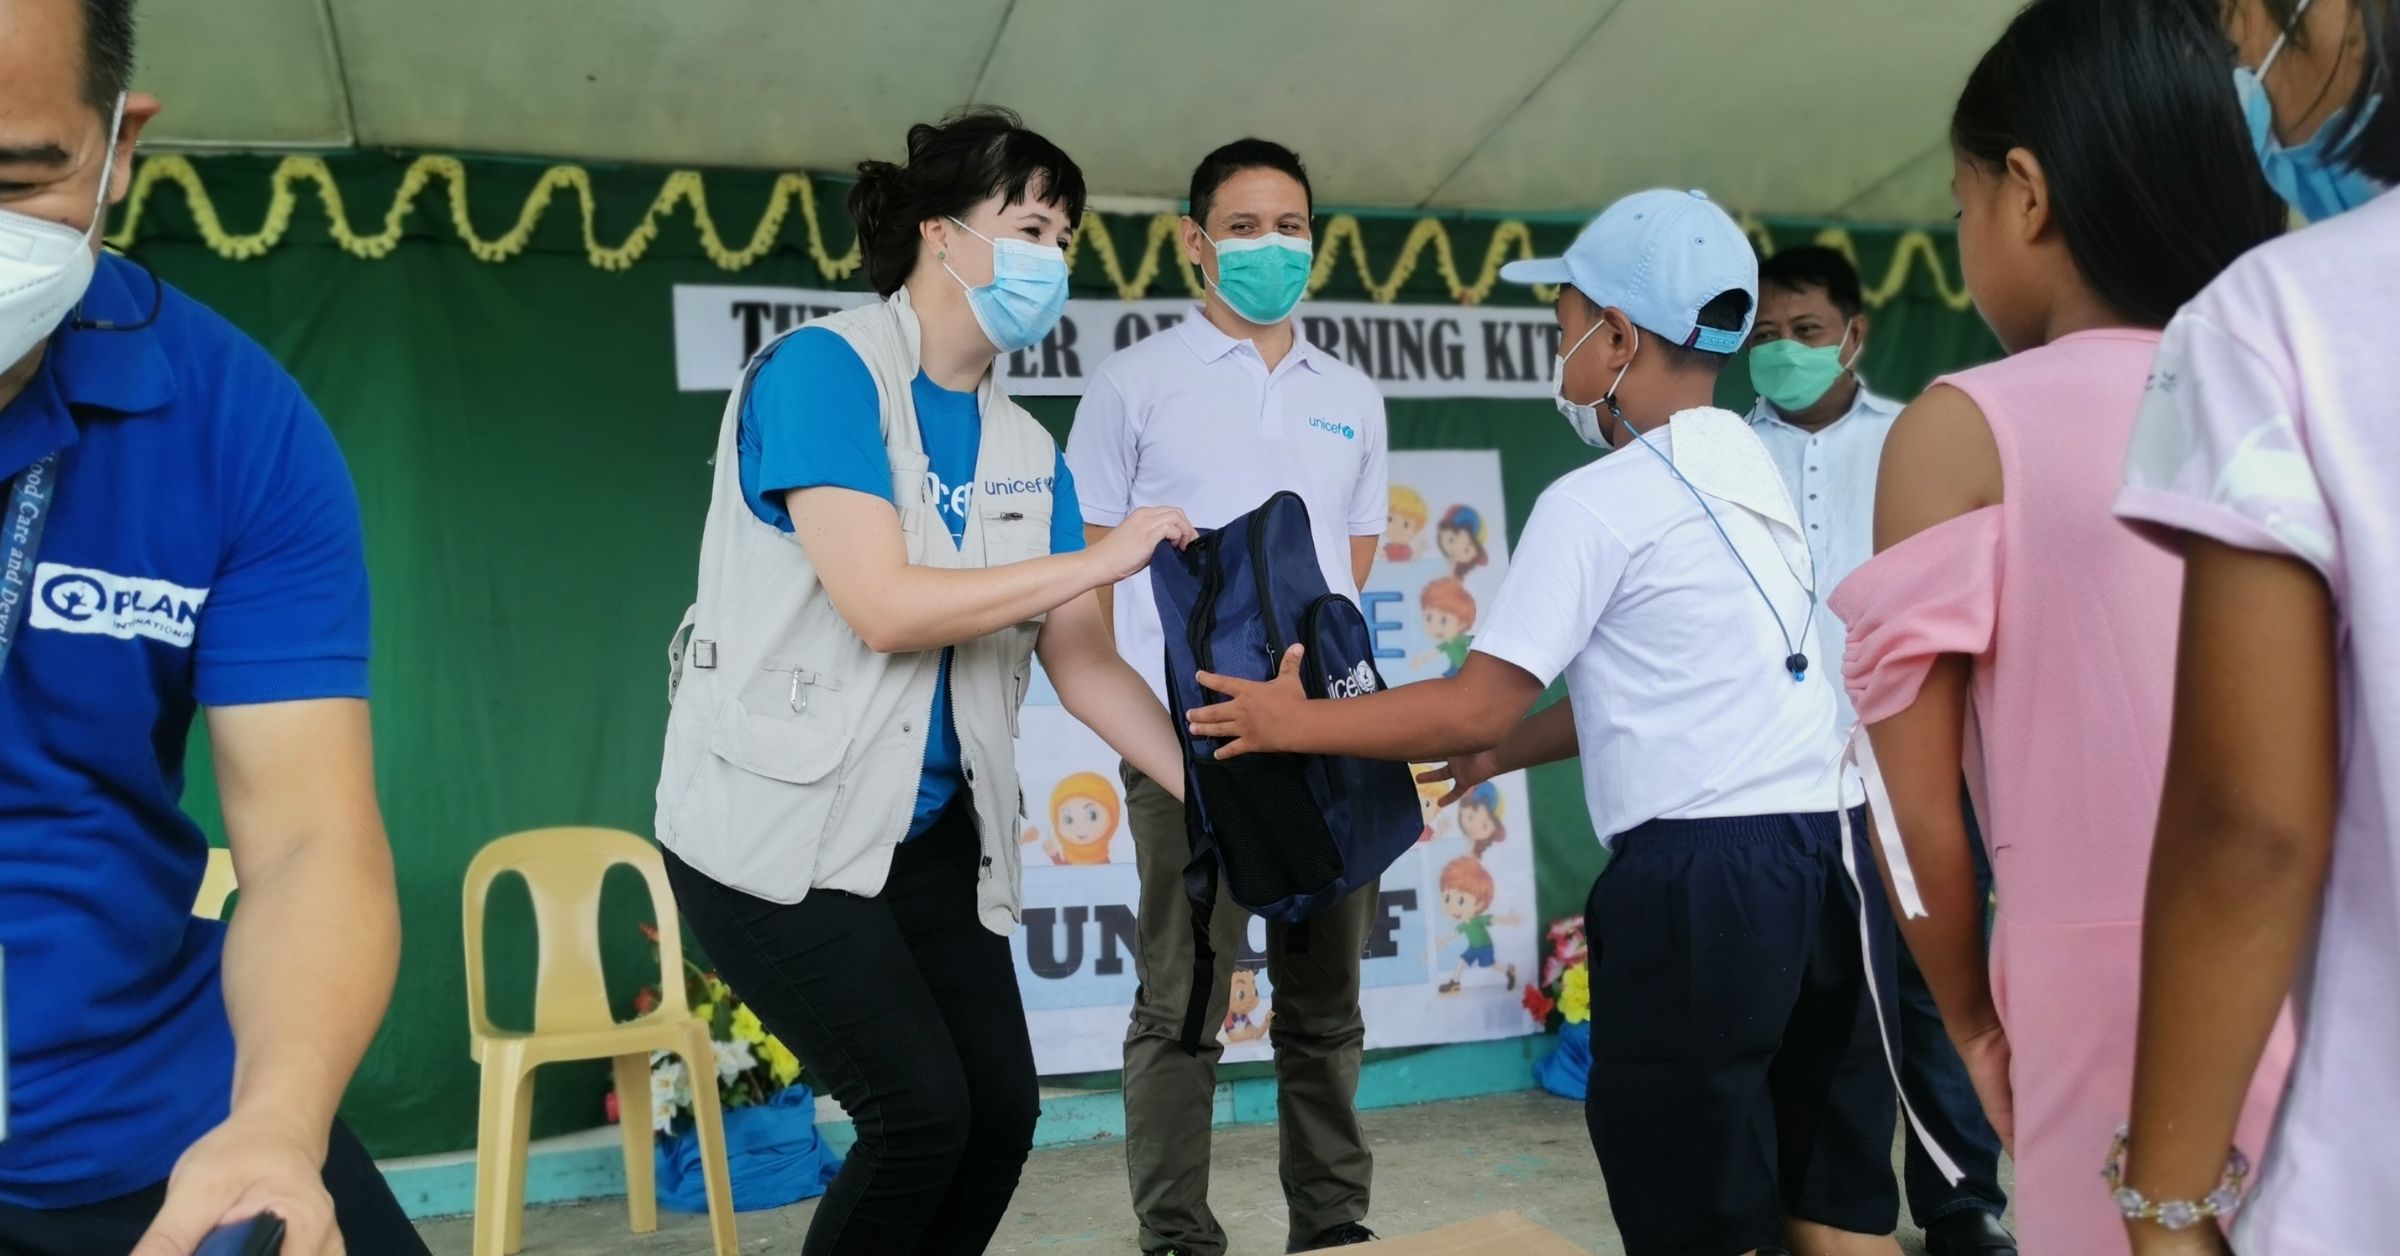 UNICEF Change for Good with Cebu Pacific back inflight